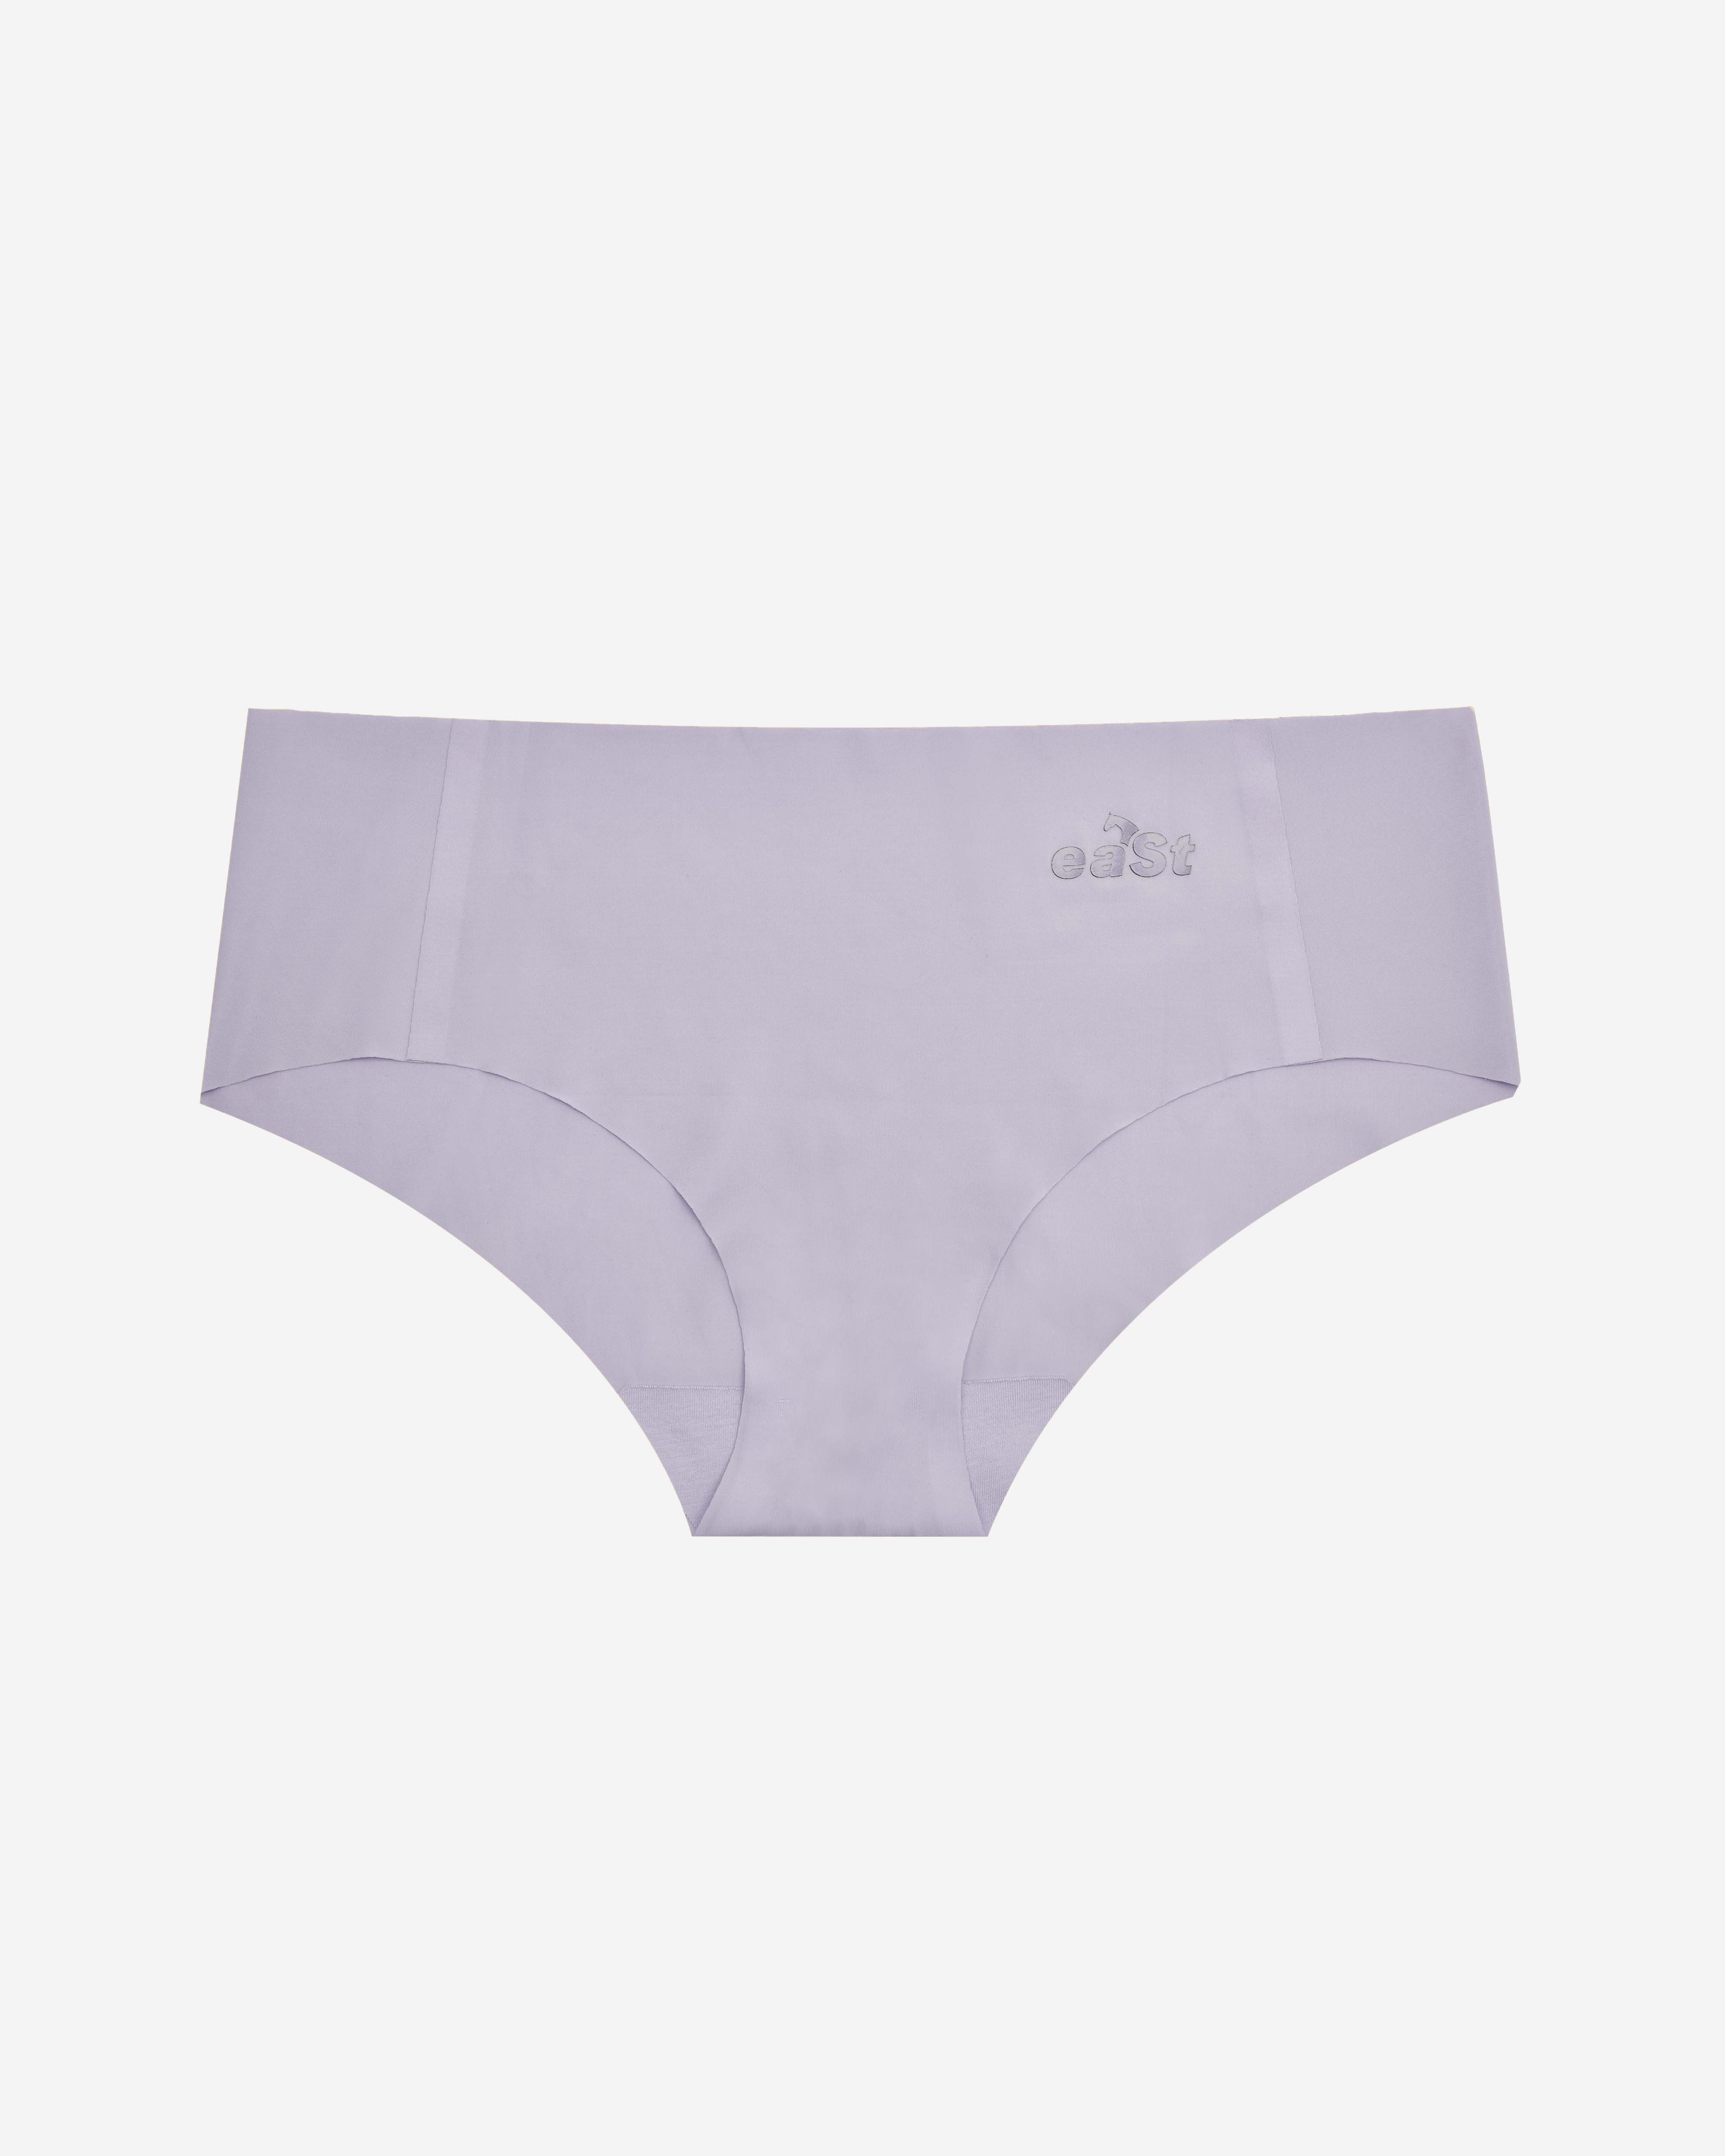 eaSt Performance Panty | Lavender | XS